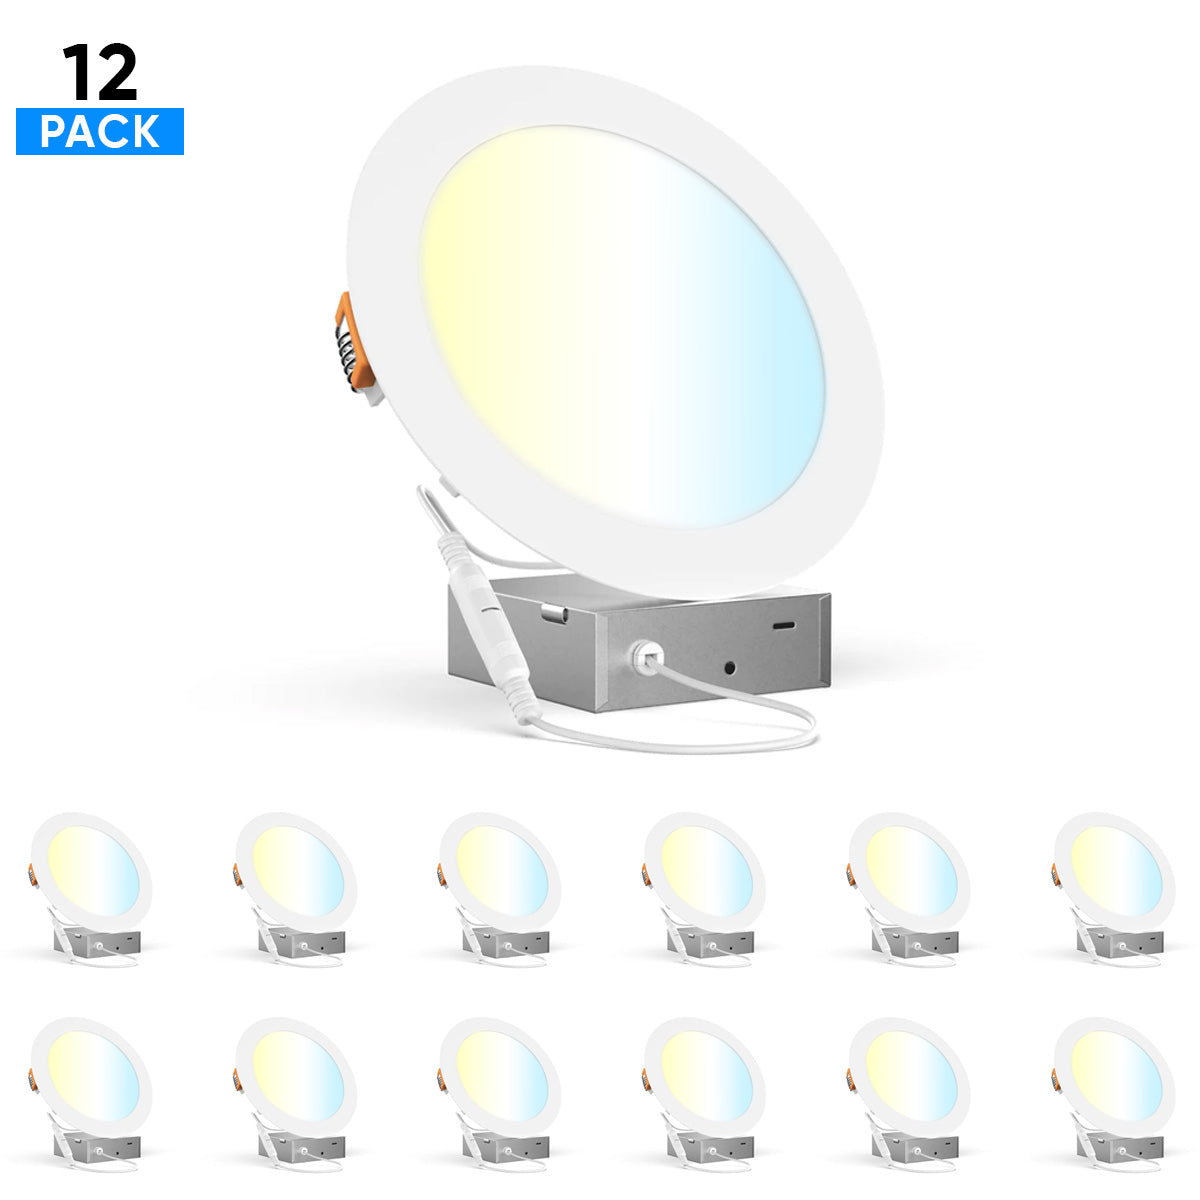 6" 12W LED Slim Panel Recessed Ceiling Light CCT Changeable 2700K/3000K/3500K/4000K/5000K, with Junction Box, Round